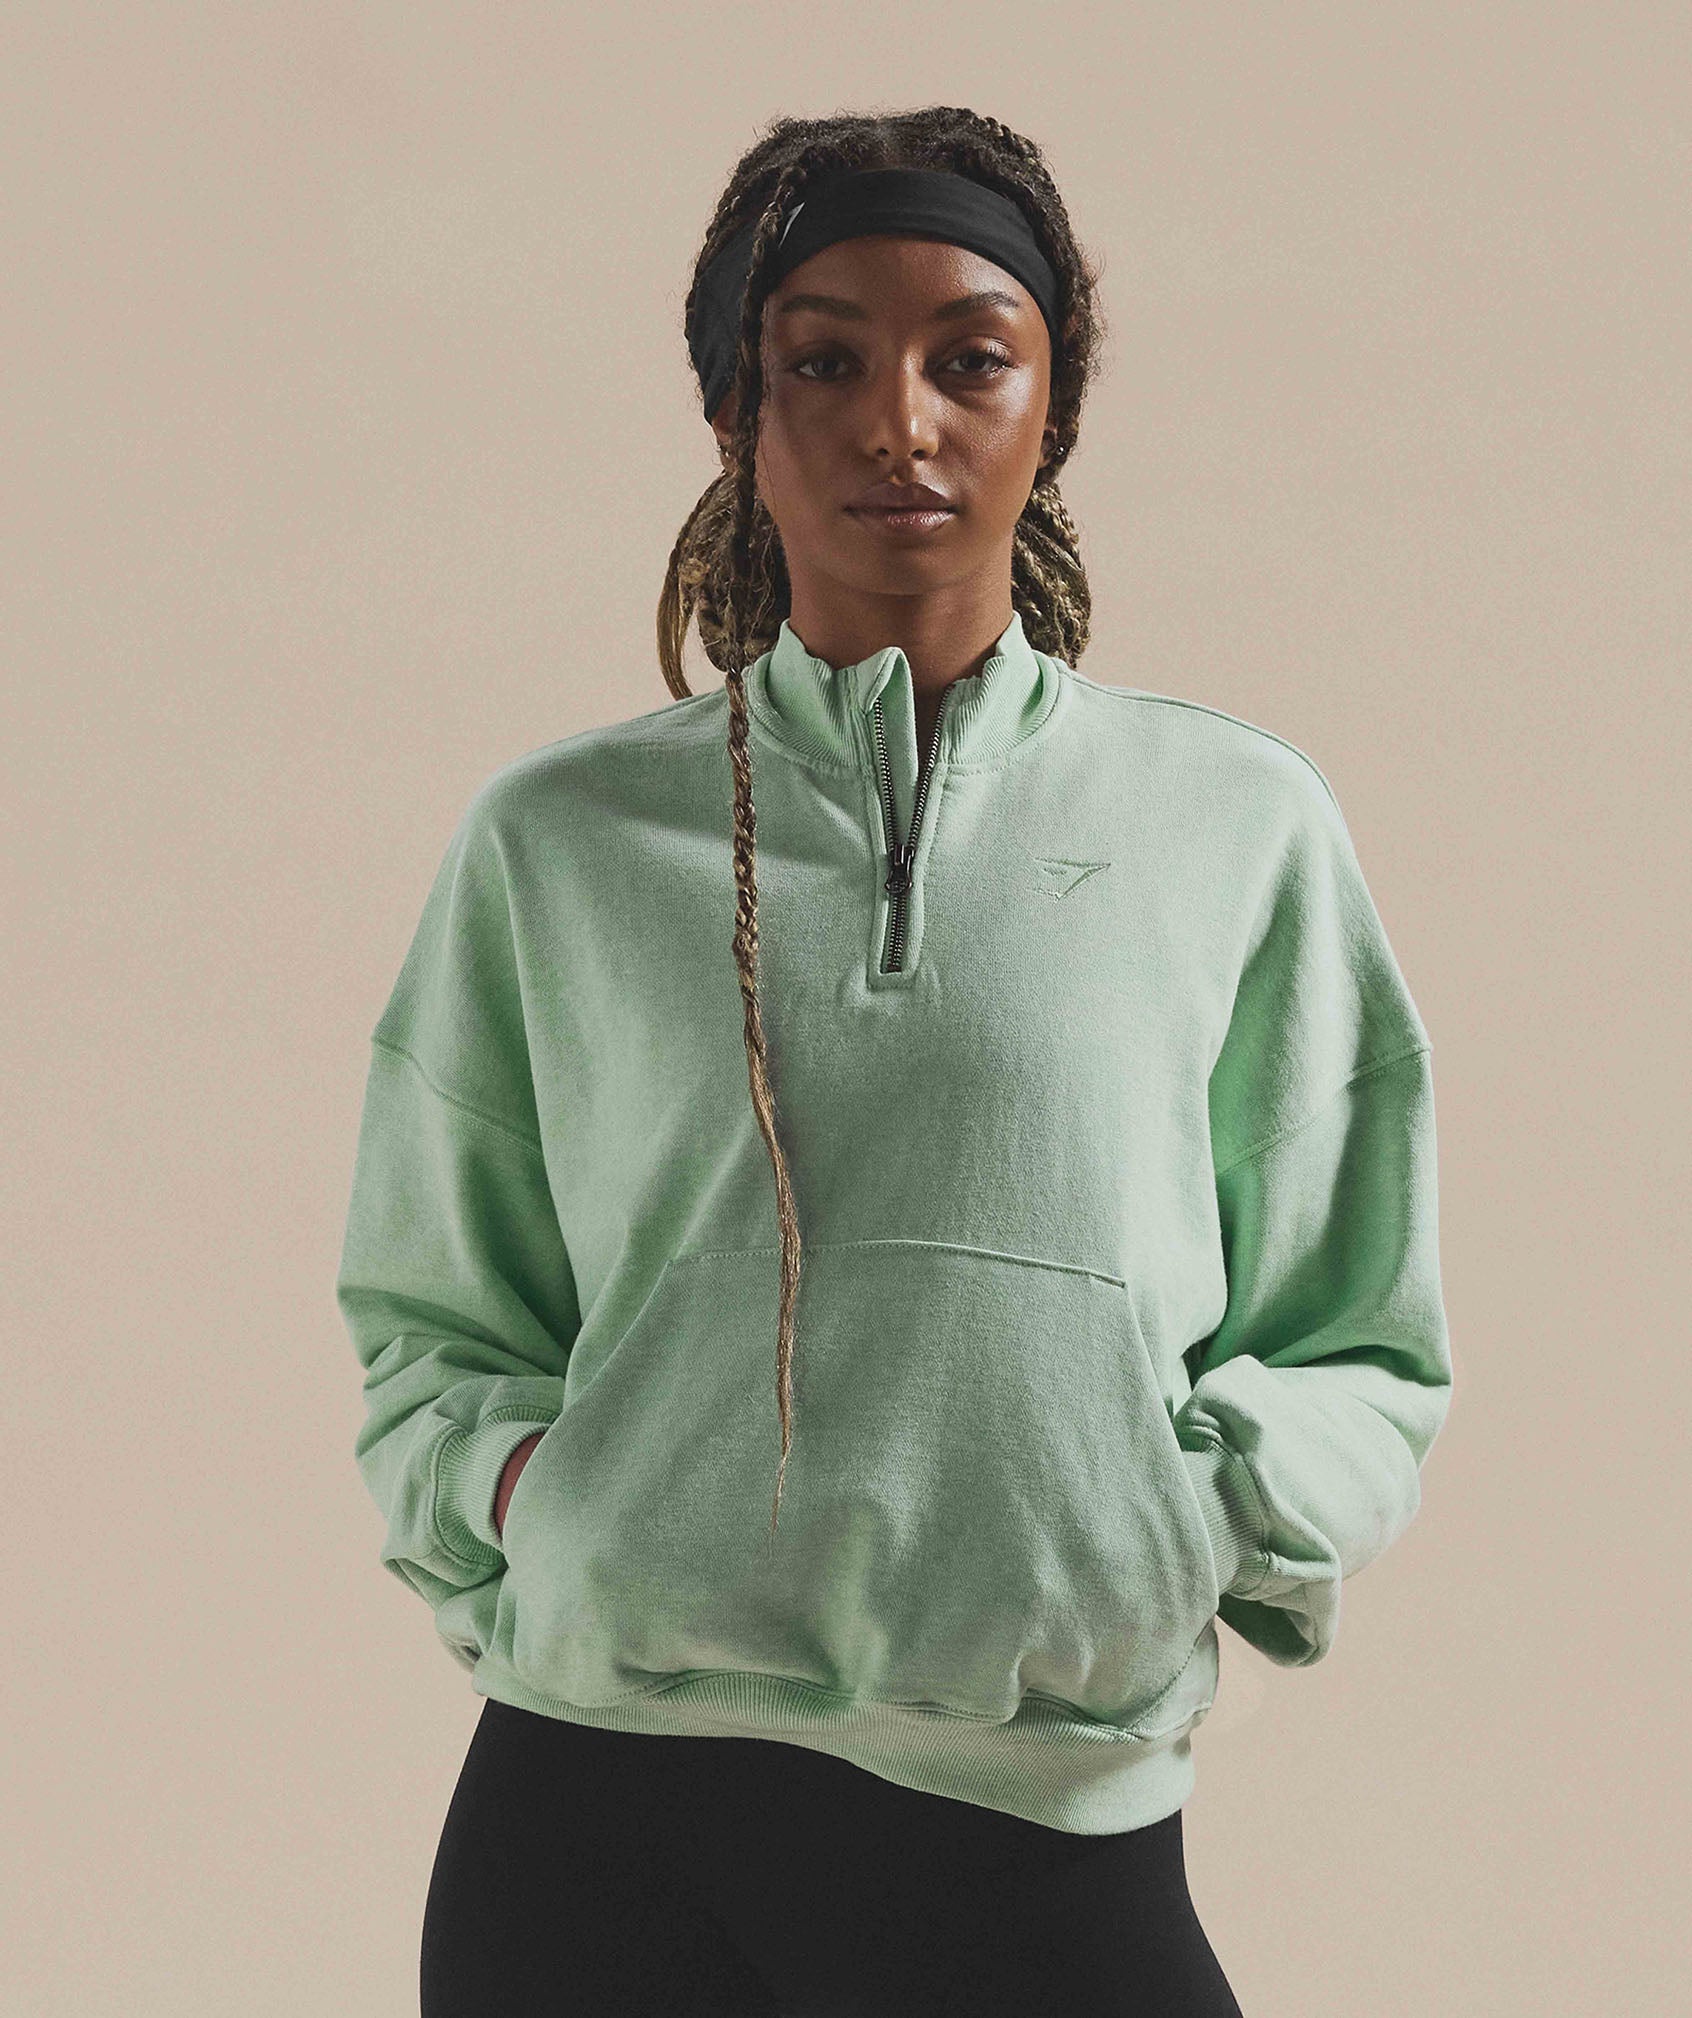 Rest Day Sweats 1/2 Zip Pullover in Refreshing Green Marl - view 1